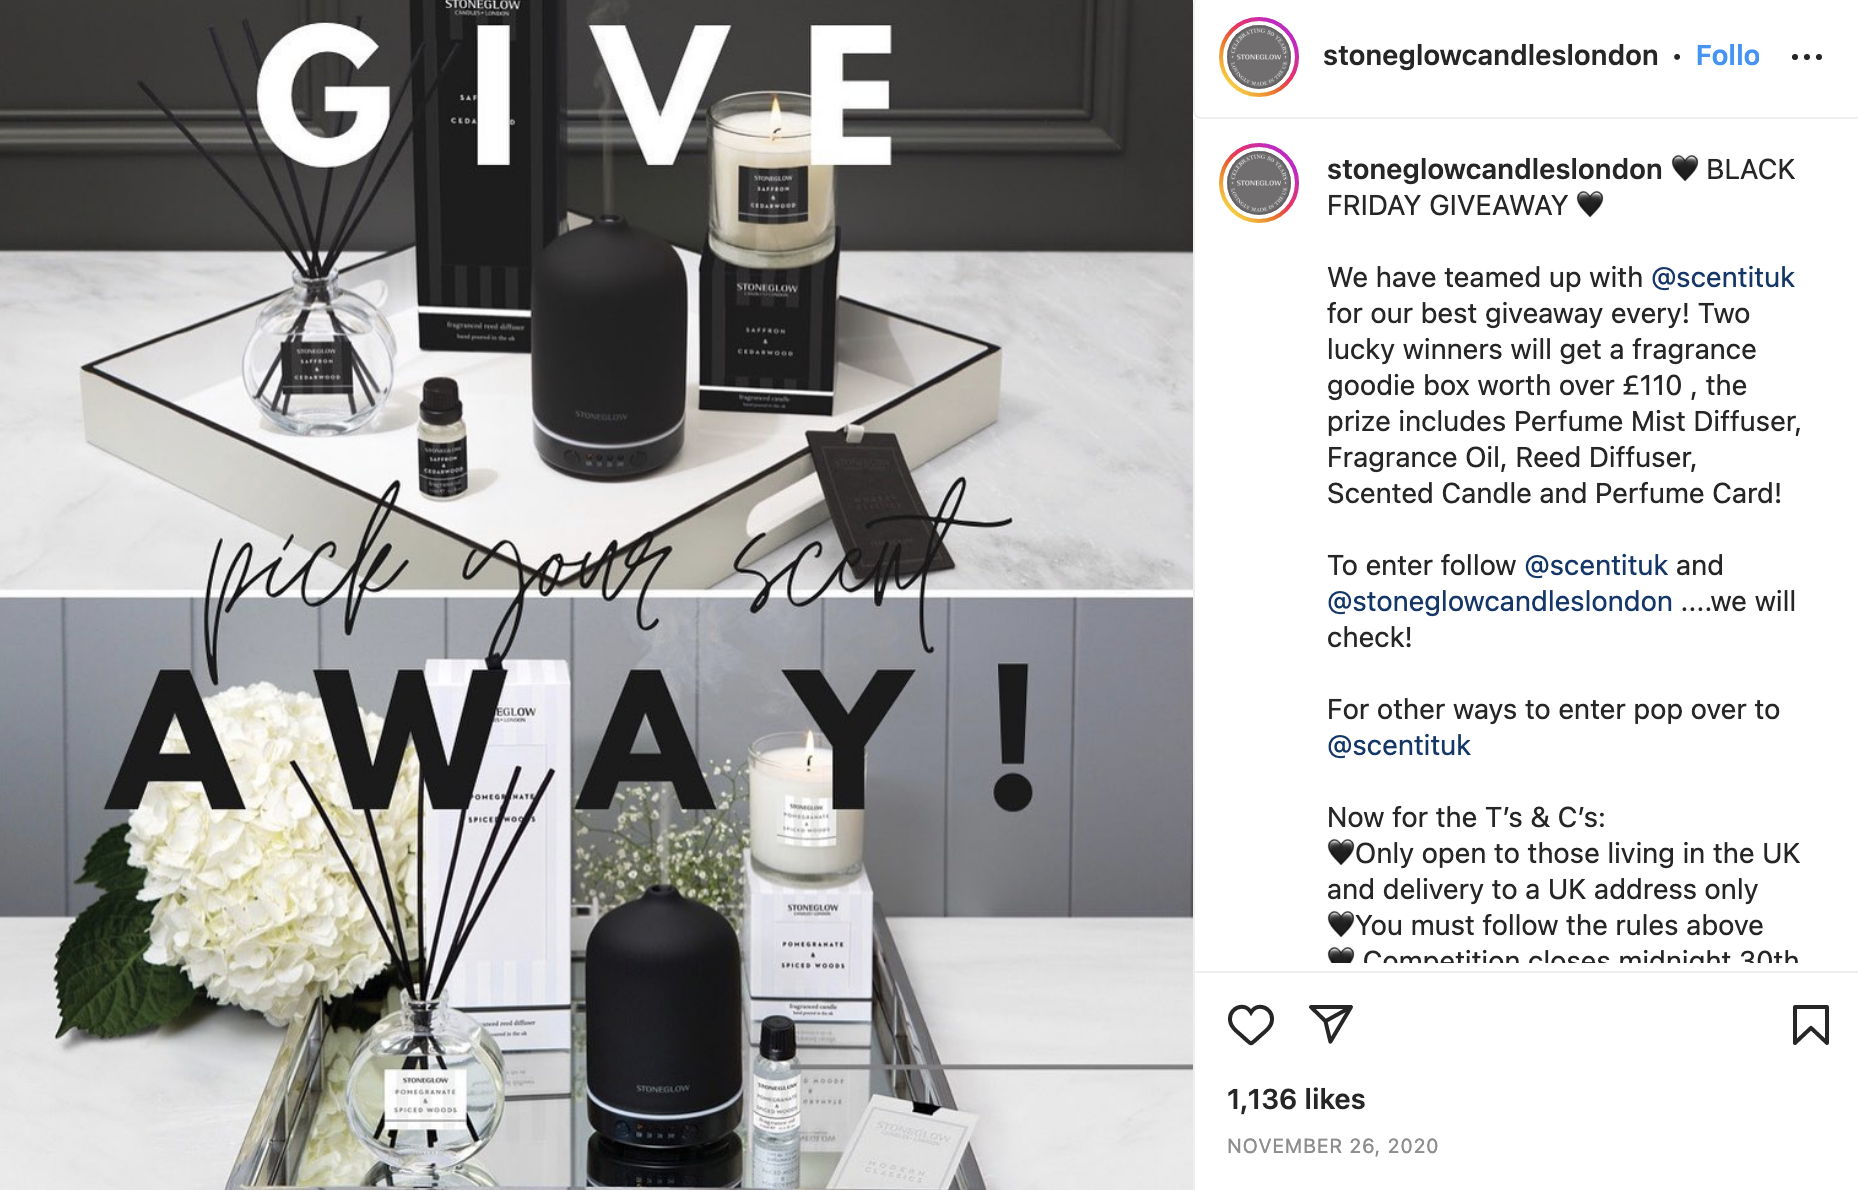 Stoneglow Instagram Giveaway